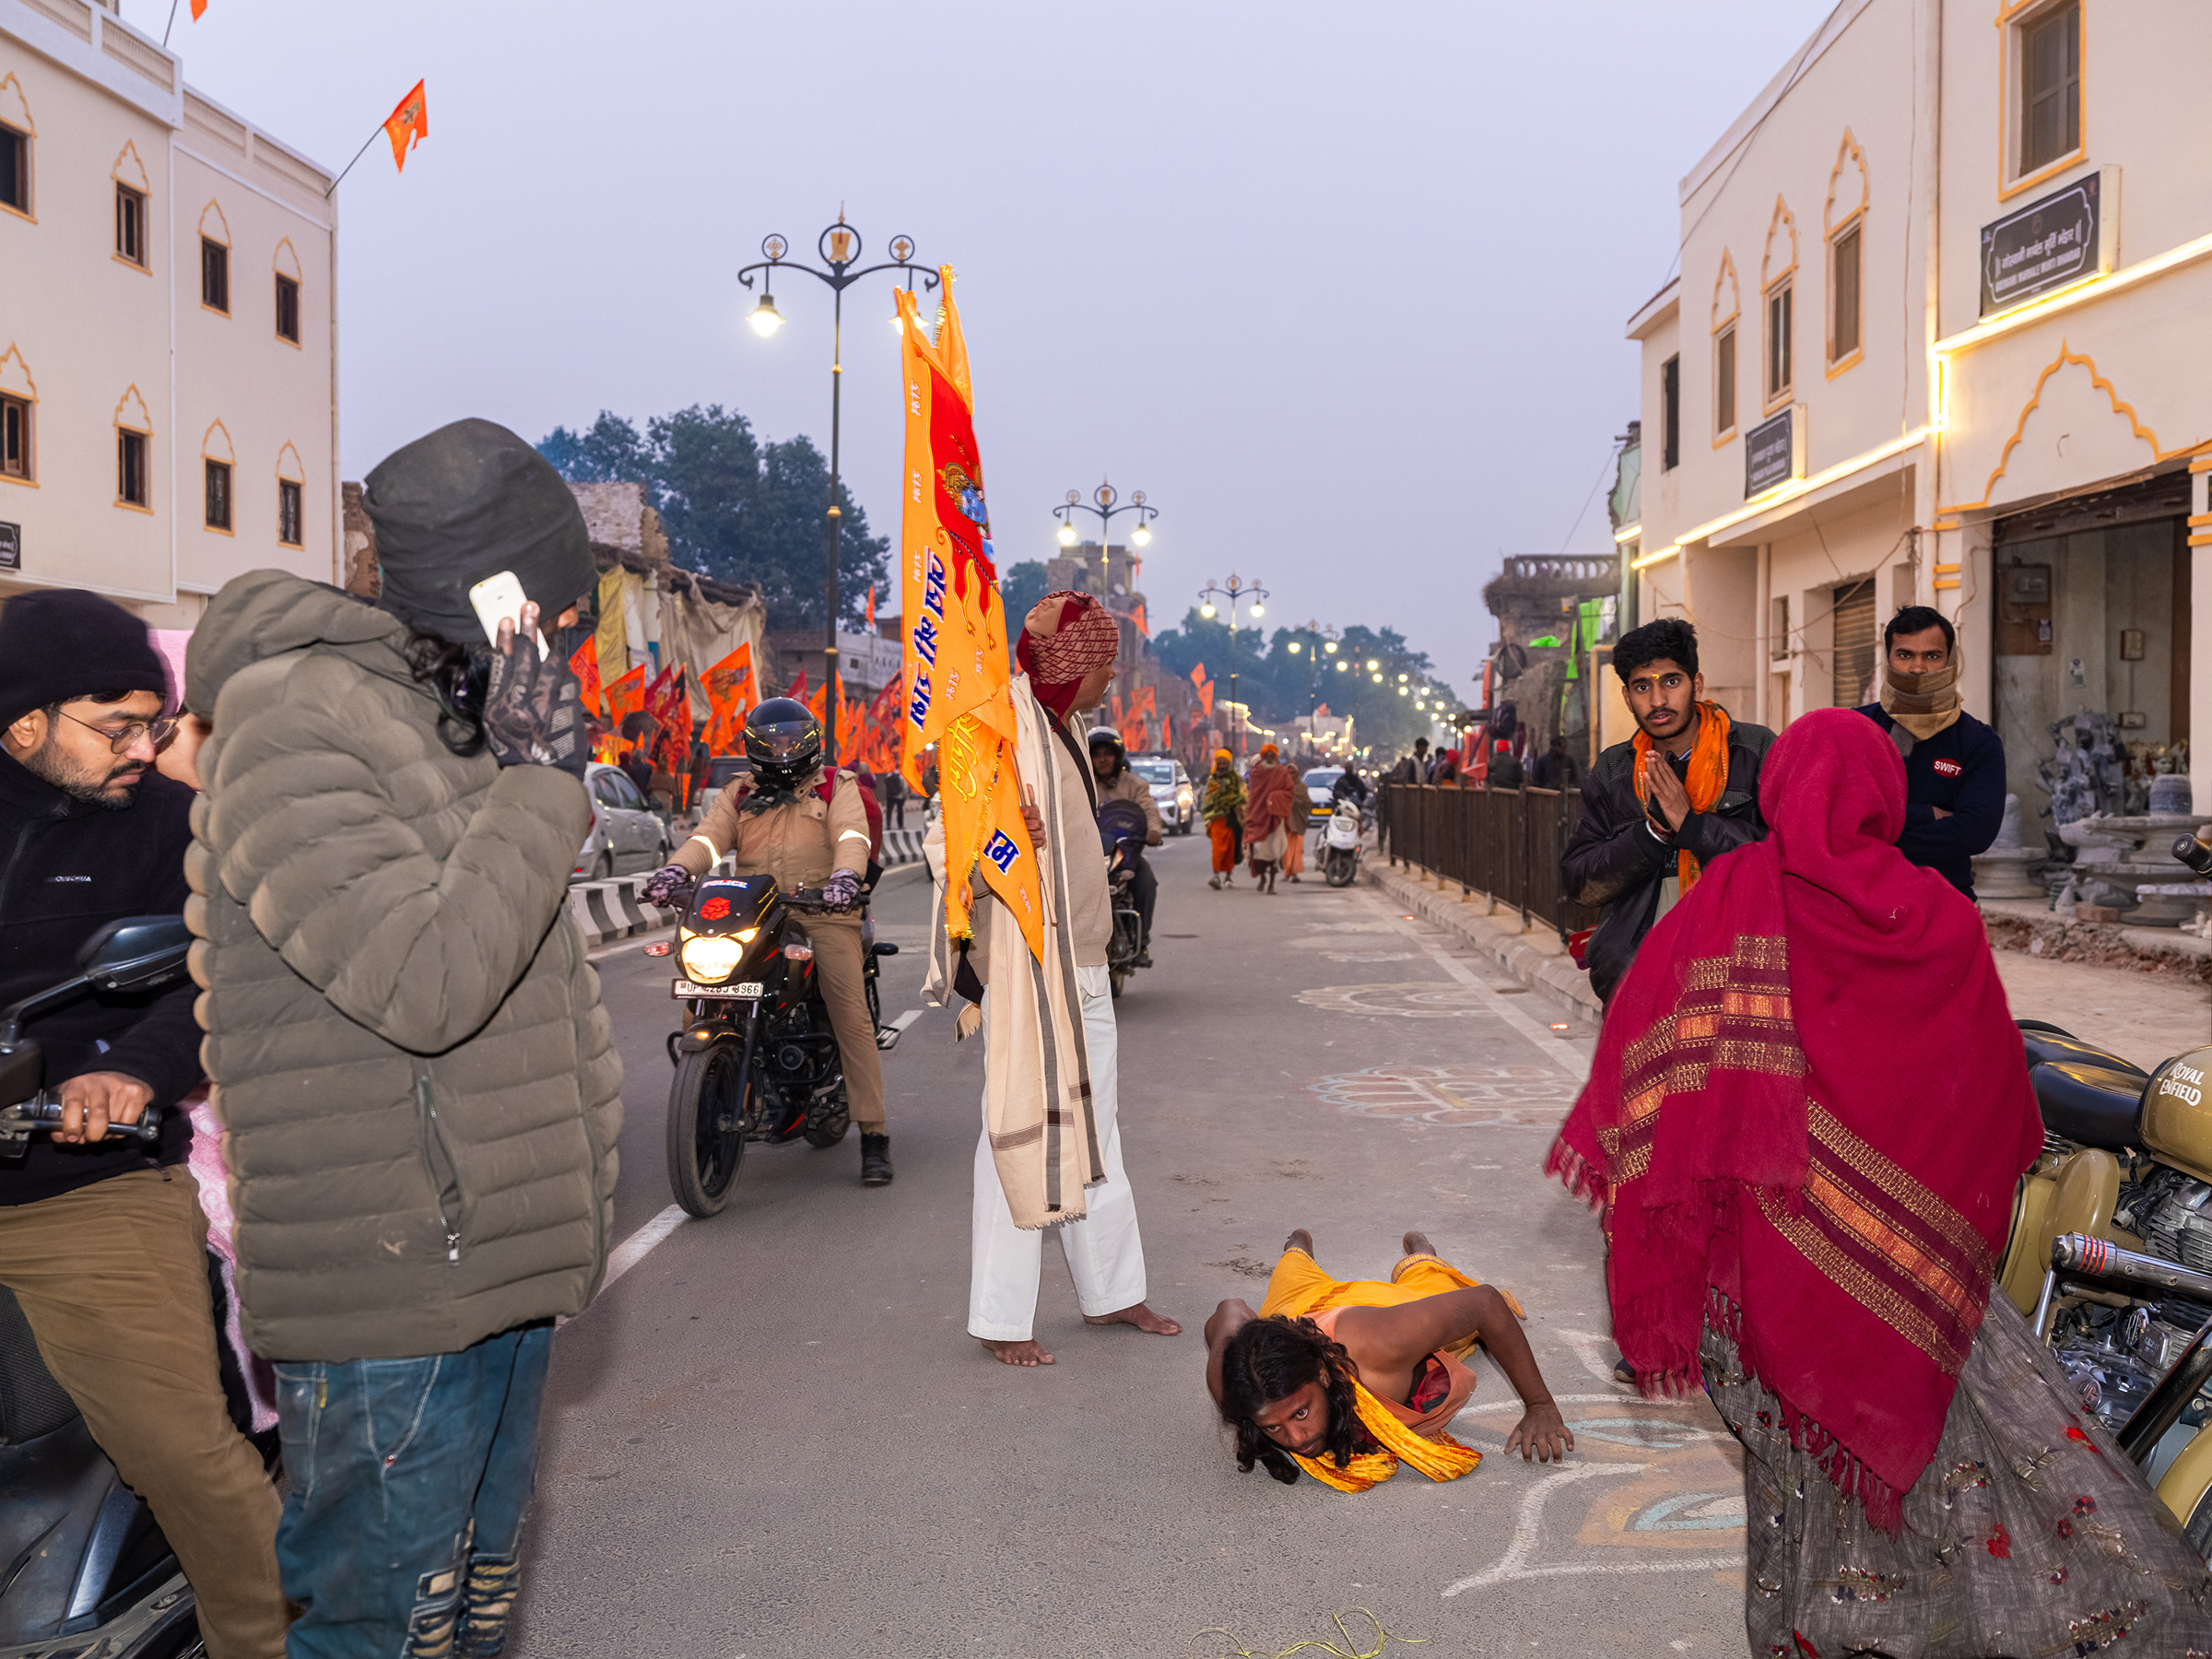 In an extreme display of devotion, Shubam Garg has travelled 130 Km from Lucknow to Ayodhya by prostrating every step of the way, on Jan. 17.